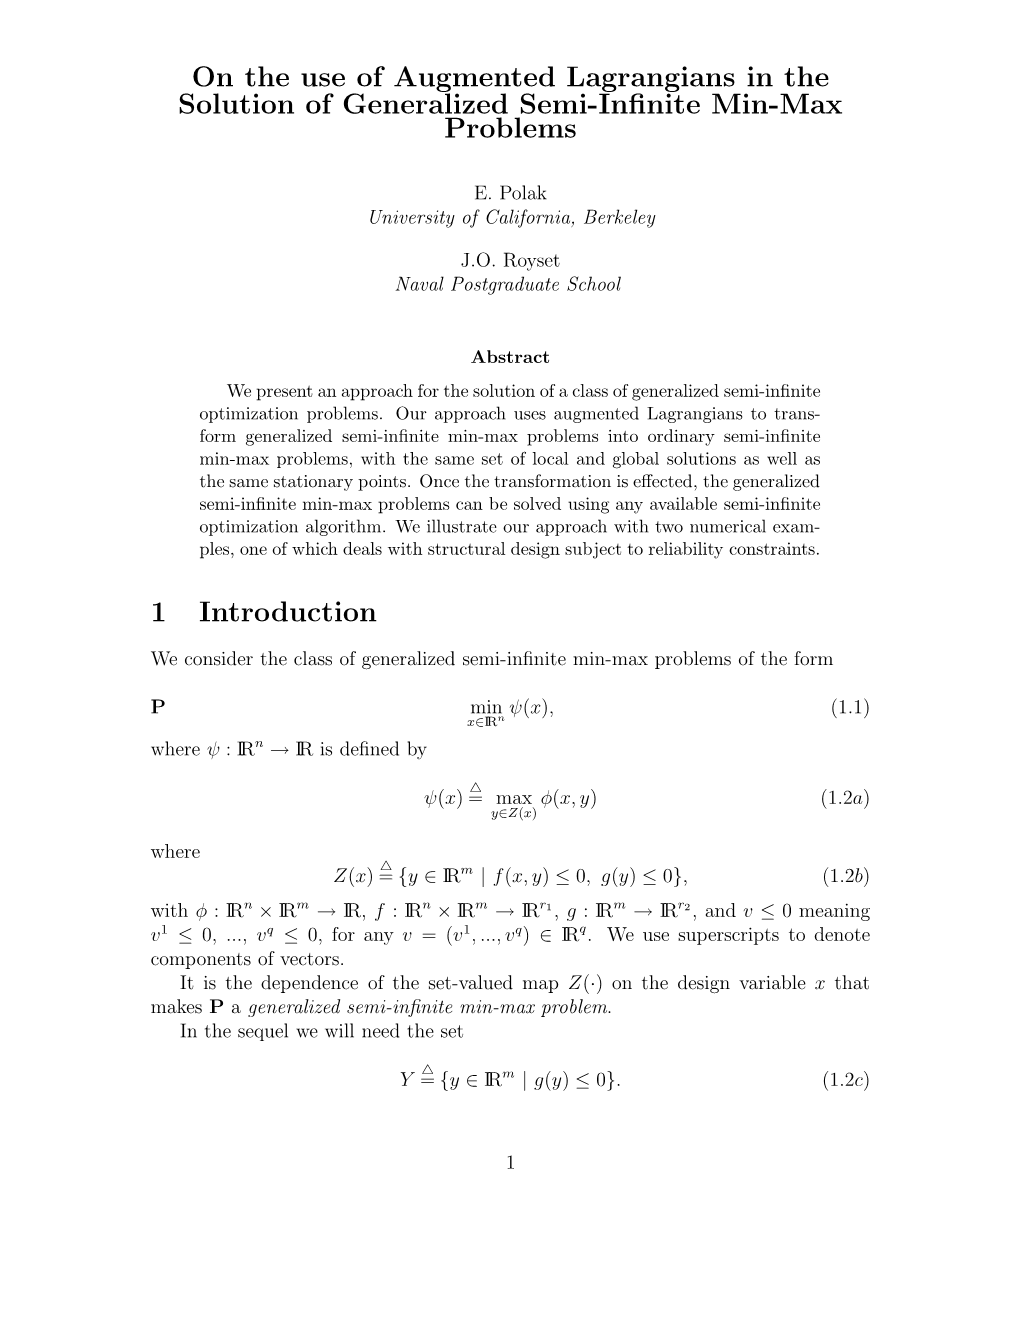 On the Use of Augmented Lagrangians in the Solution of Generalized Semi-Inﬁnite Min-Max Problems